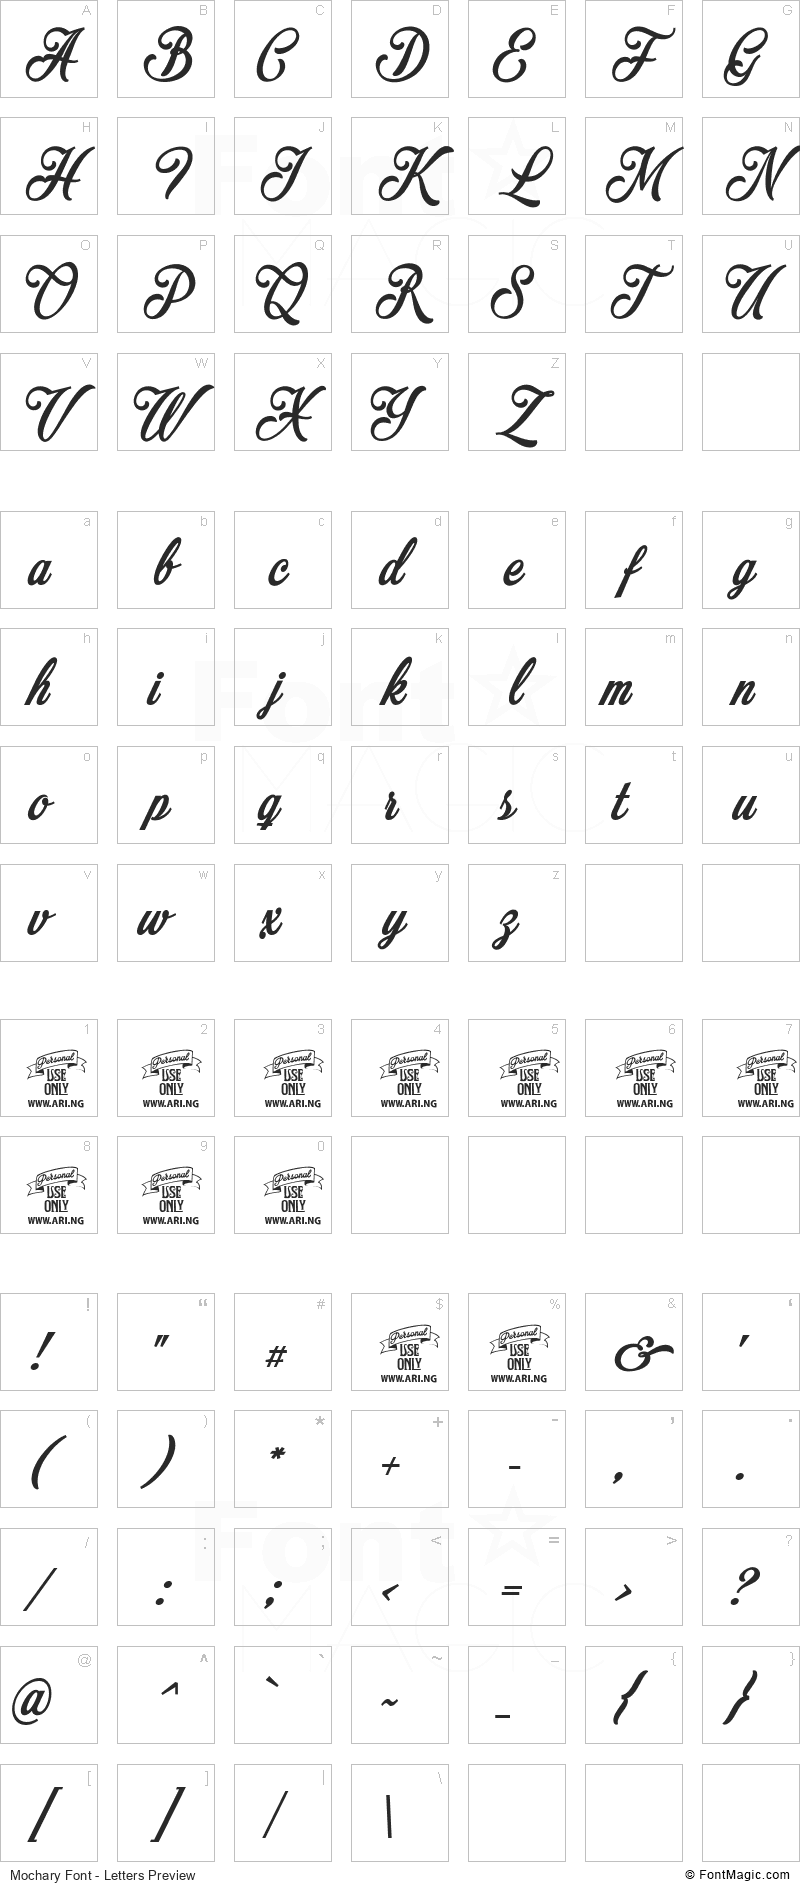 Mochary Font - All Latters Preview Chart